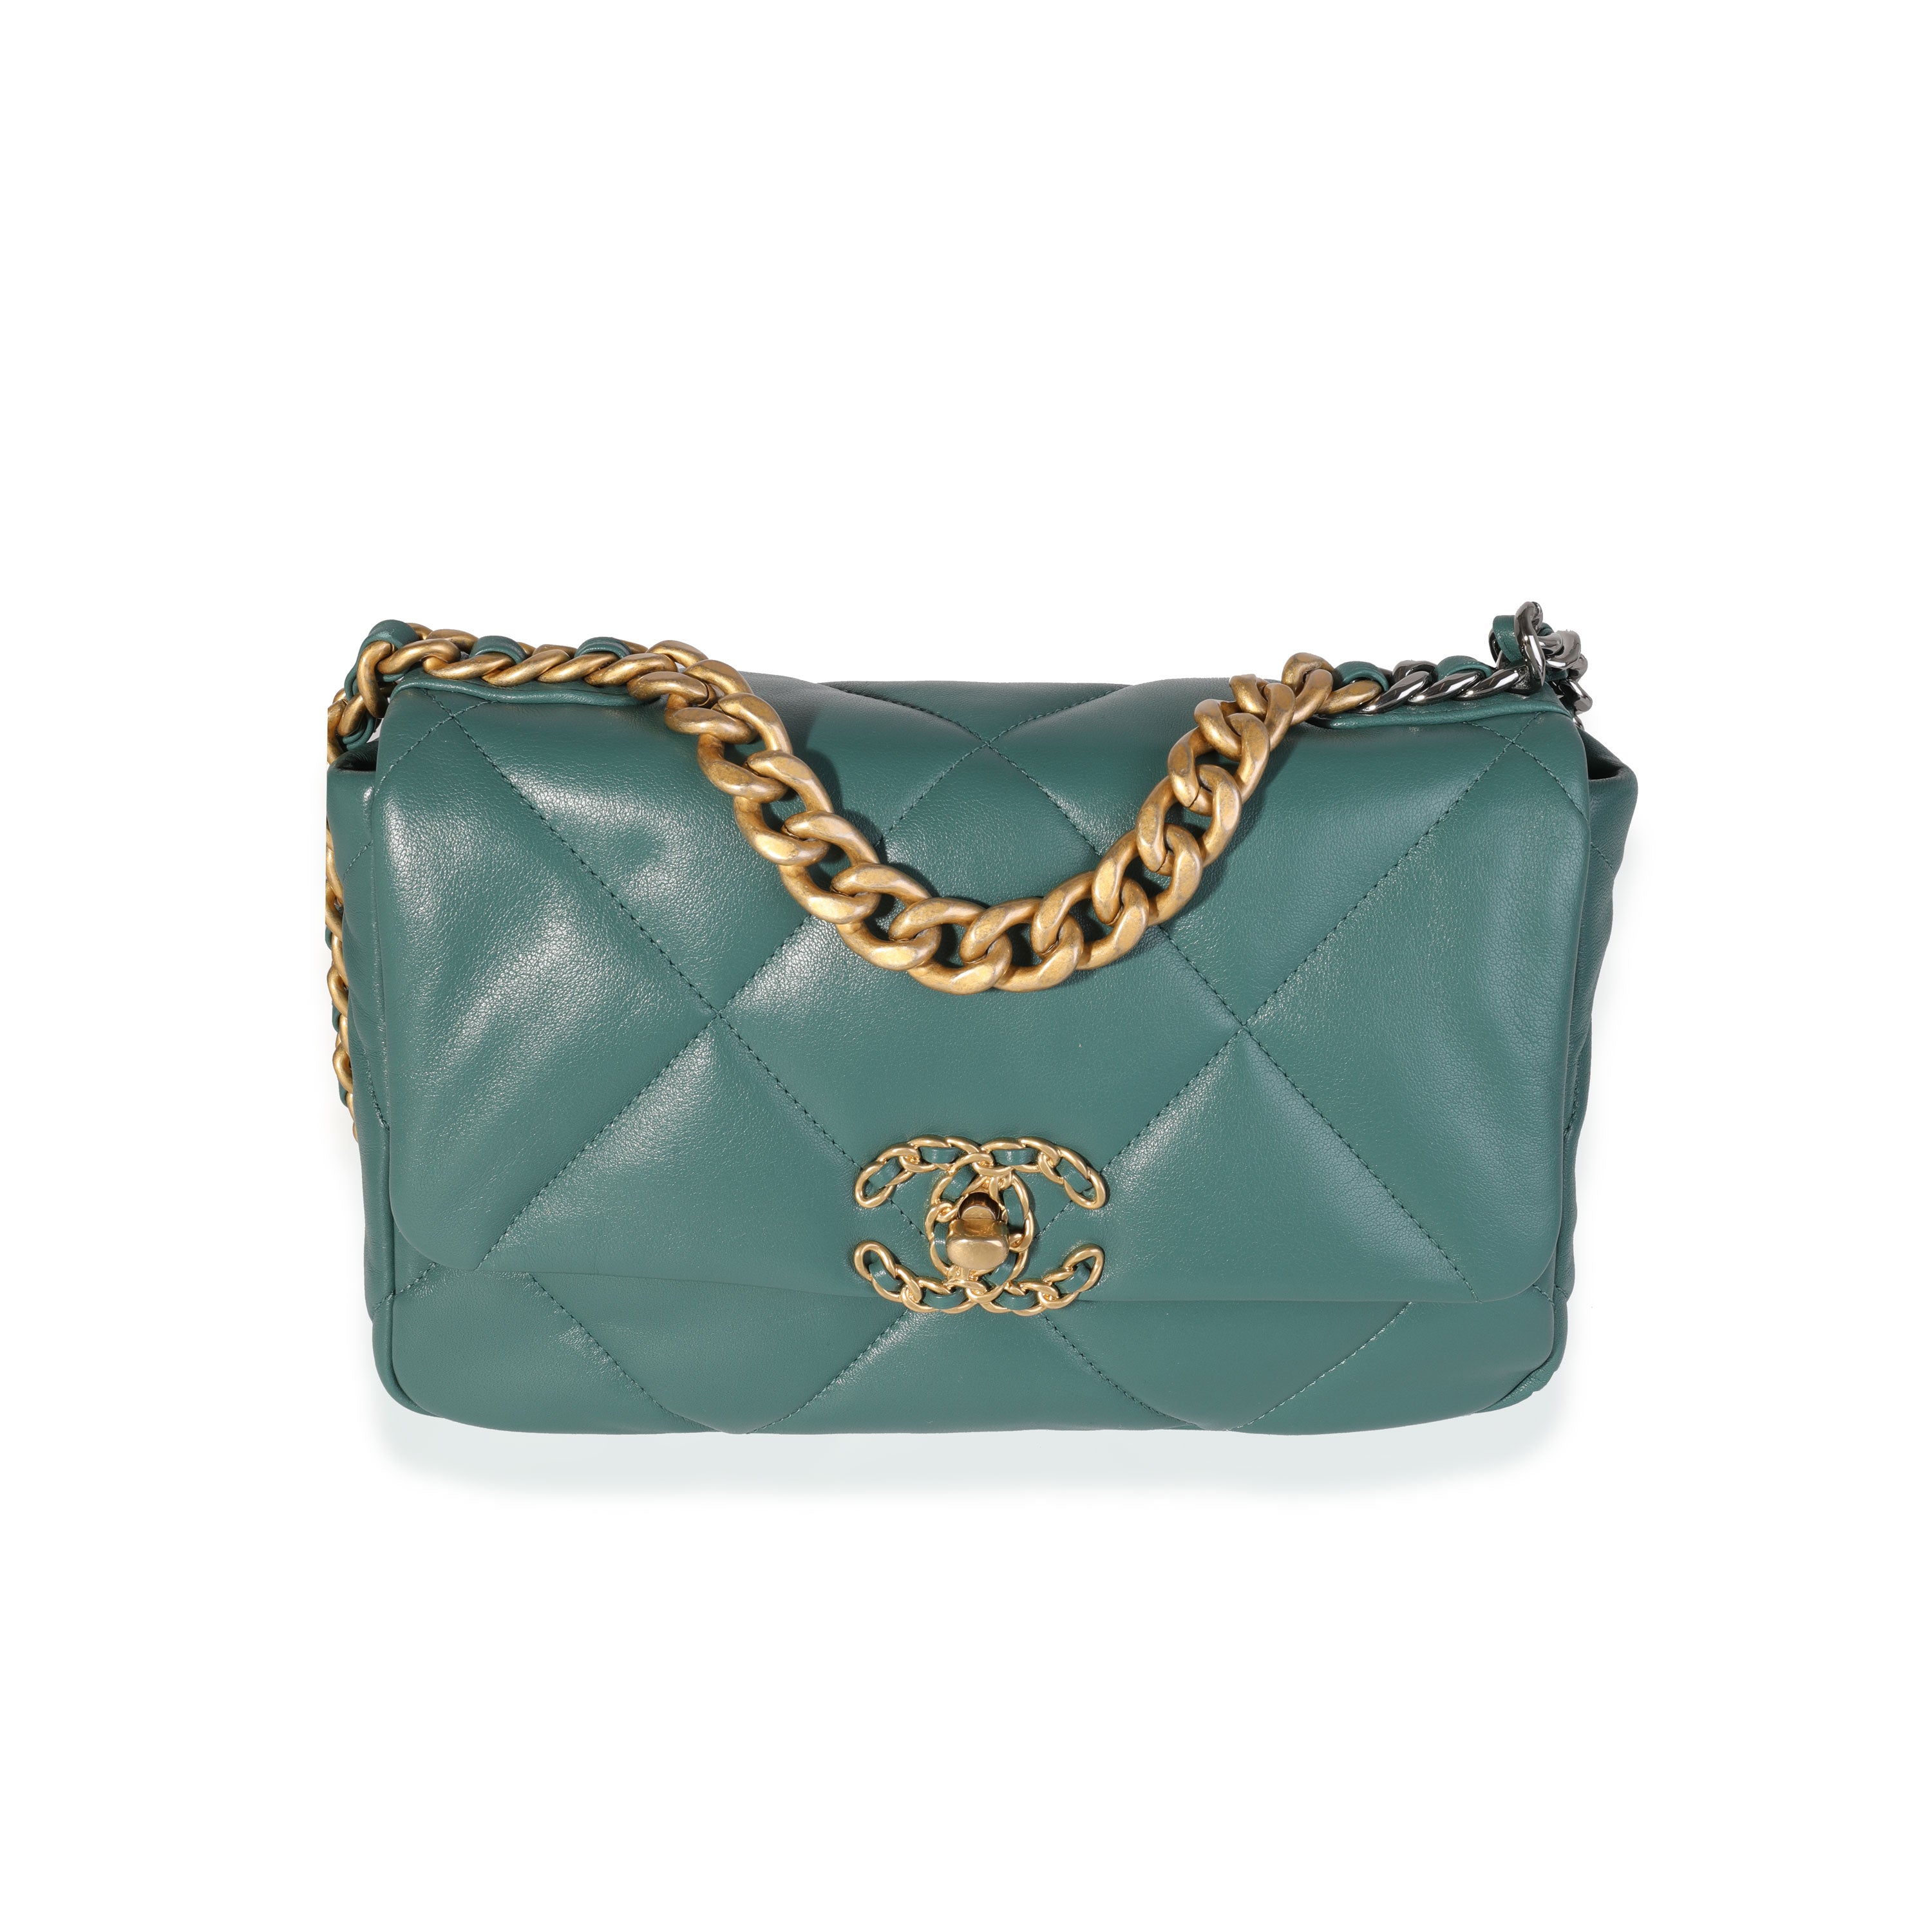 Turquoise Quilted Lambskin Chanel 19 Flap Gold and Ruthenium Hardware, 2020 (Very Good), Green/Blue Womens Handbag